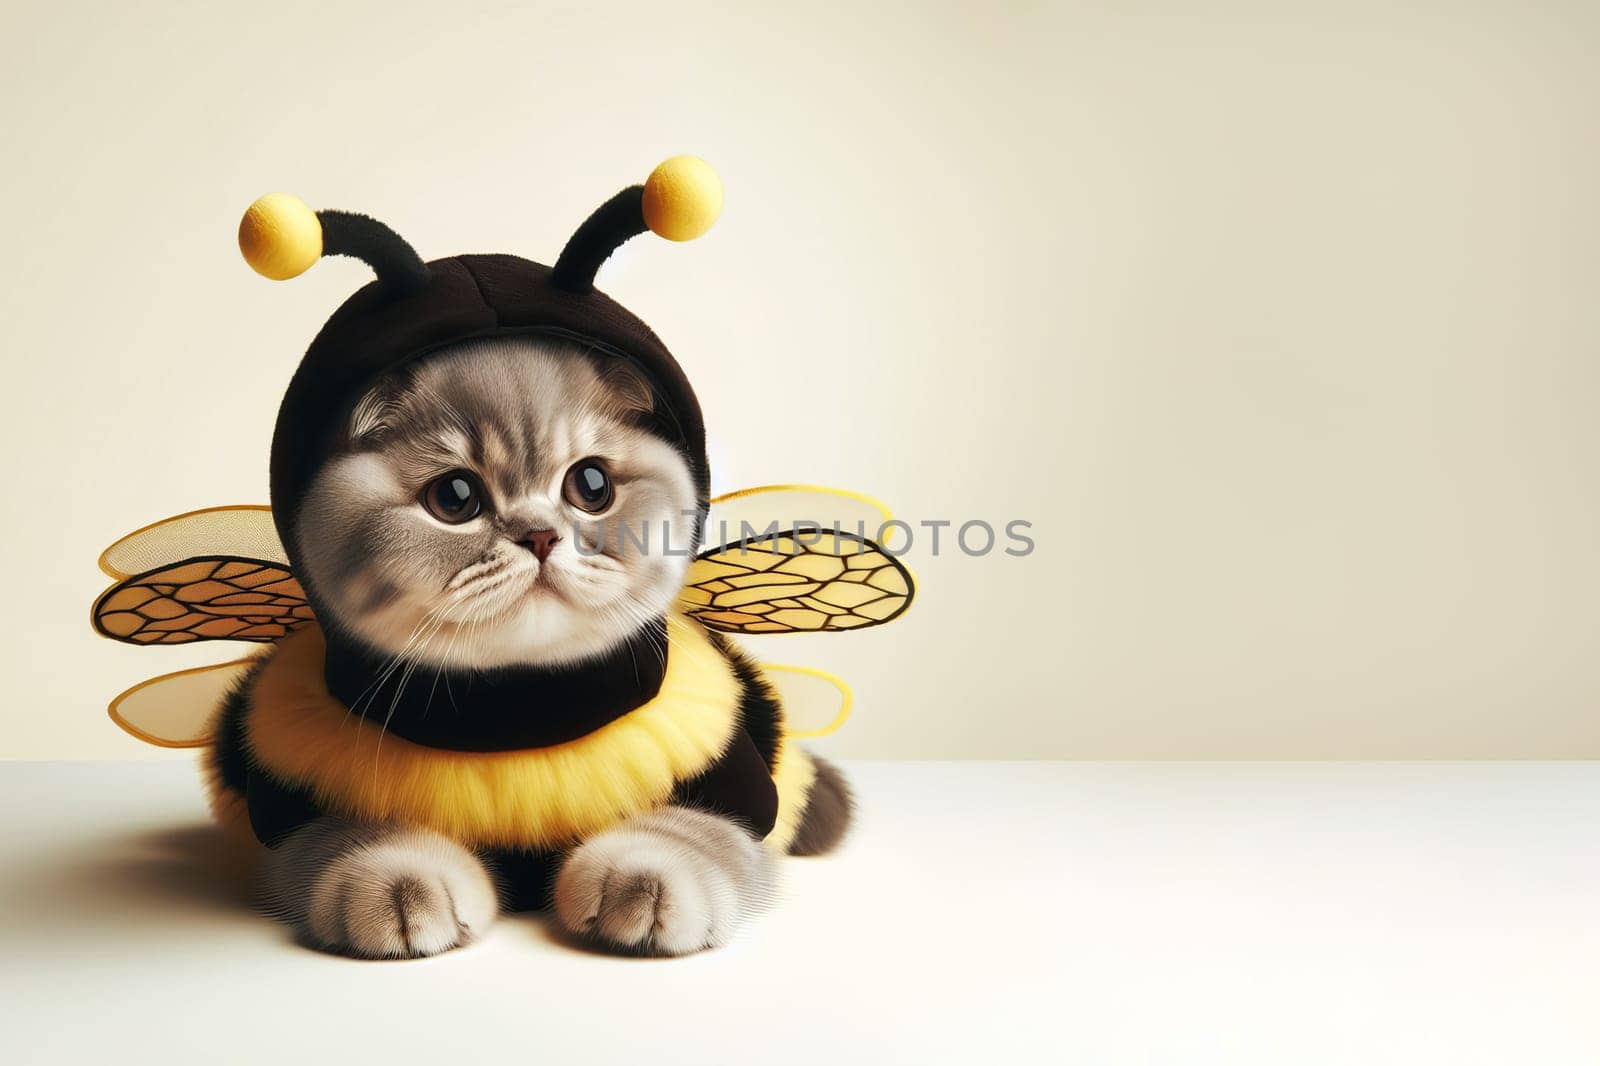 Cute gray cat of the British breed dressed in a bee costume, light background. by OlgaGubskaya